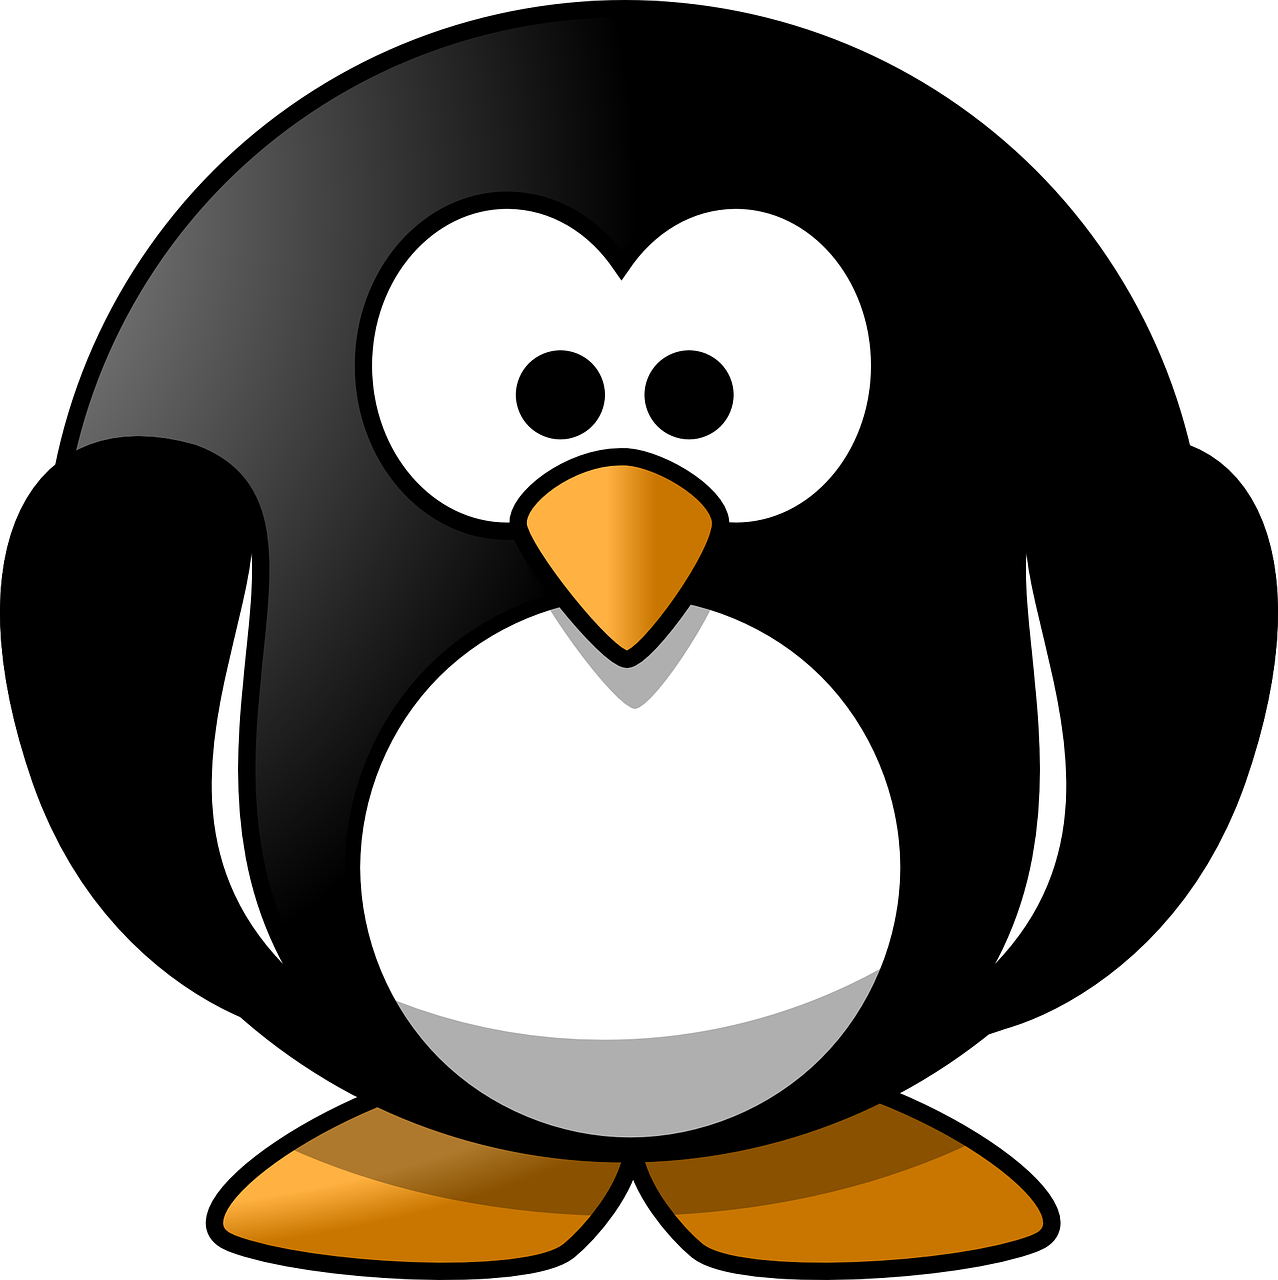 a close up of a penguin on a black background, a screenshot, computer art, “portrait of a cartoon animal, clean and simple design, by joseph binder, stuffed